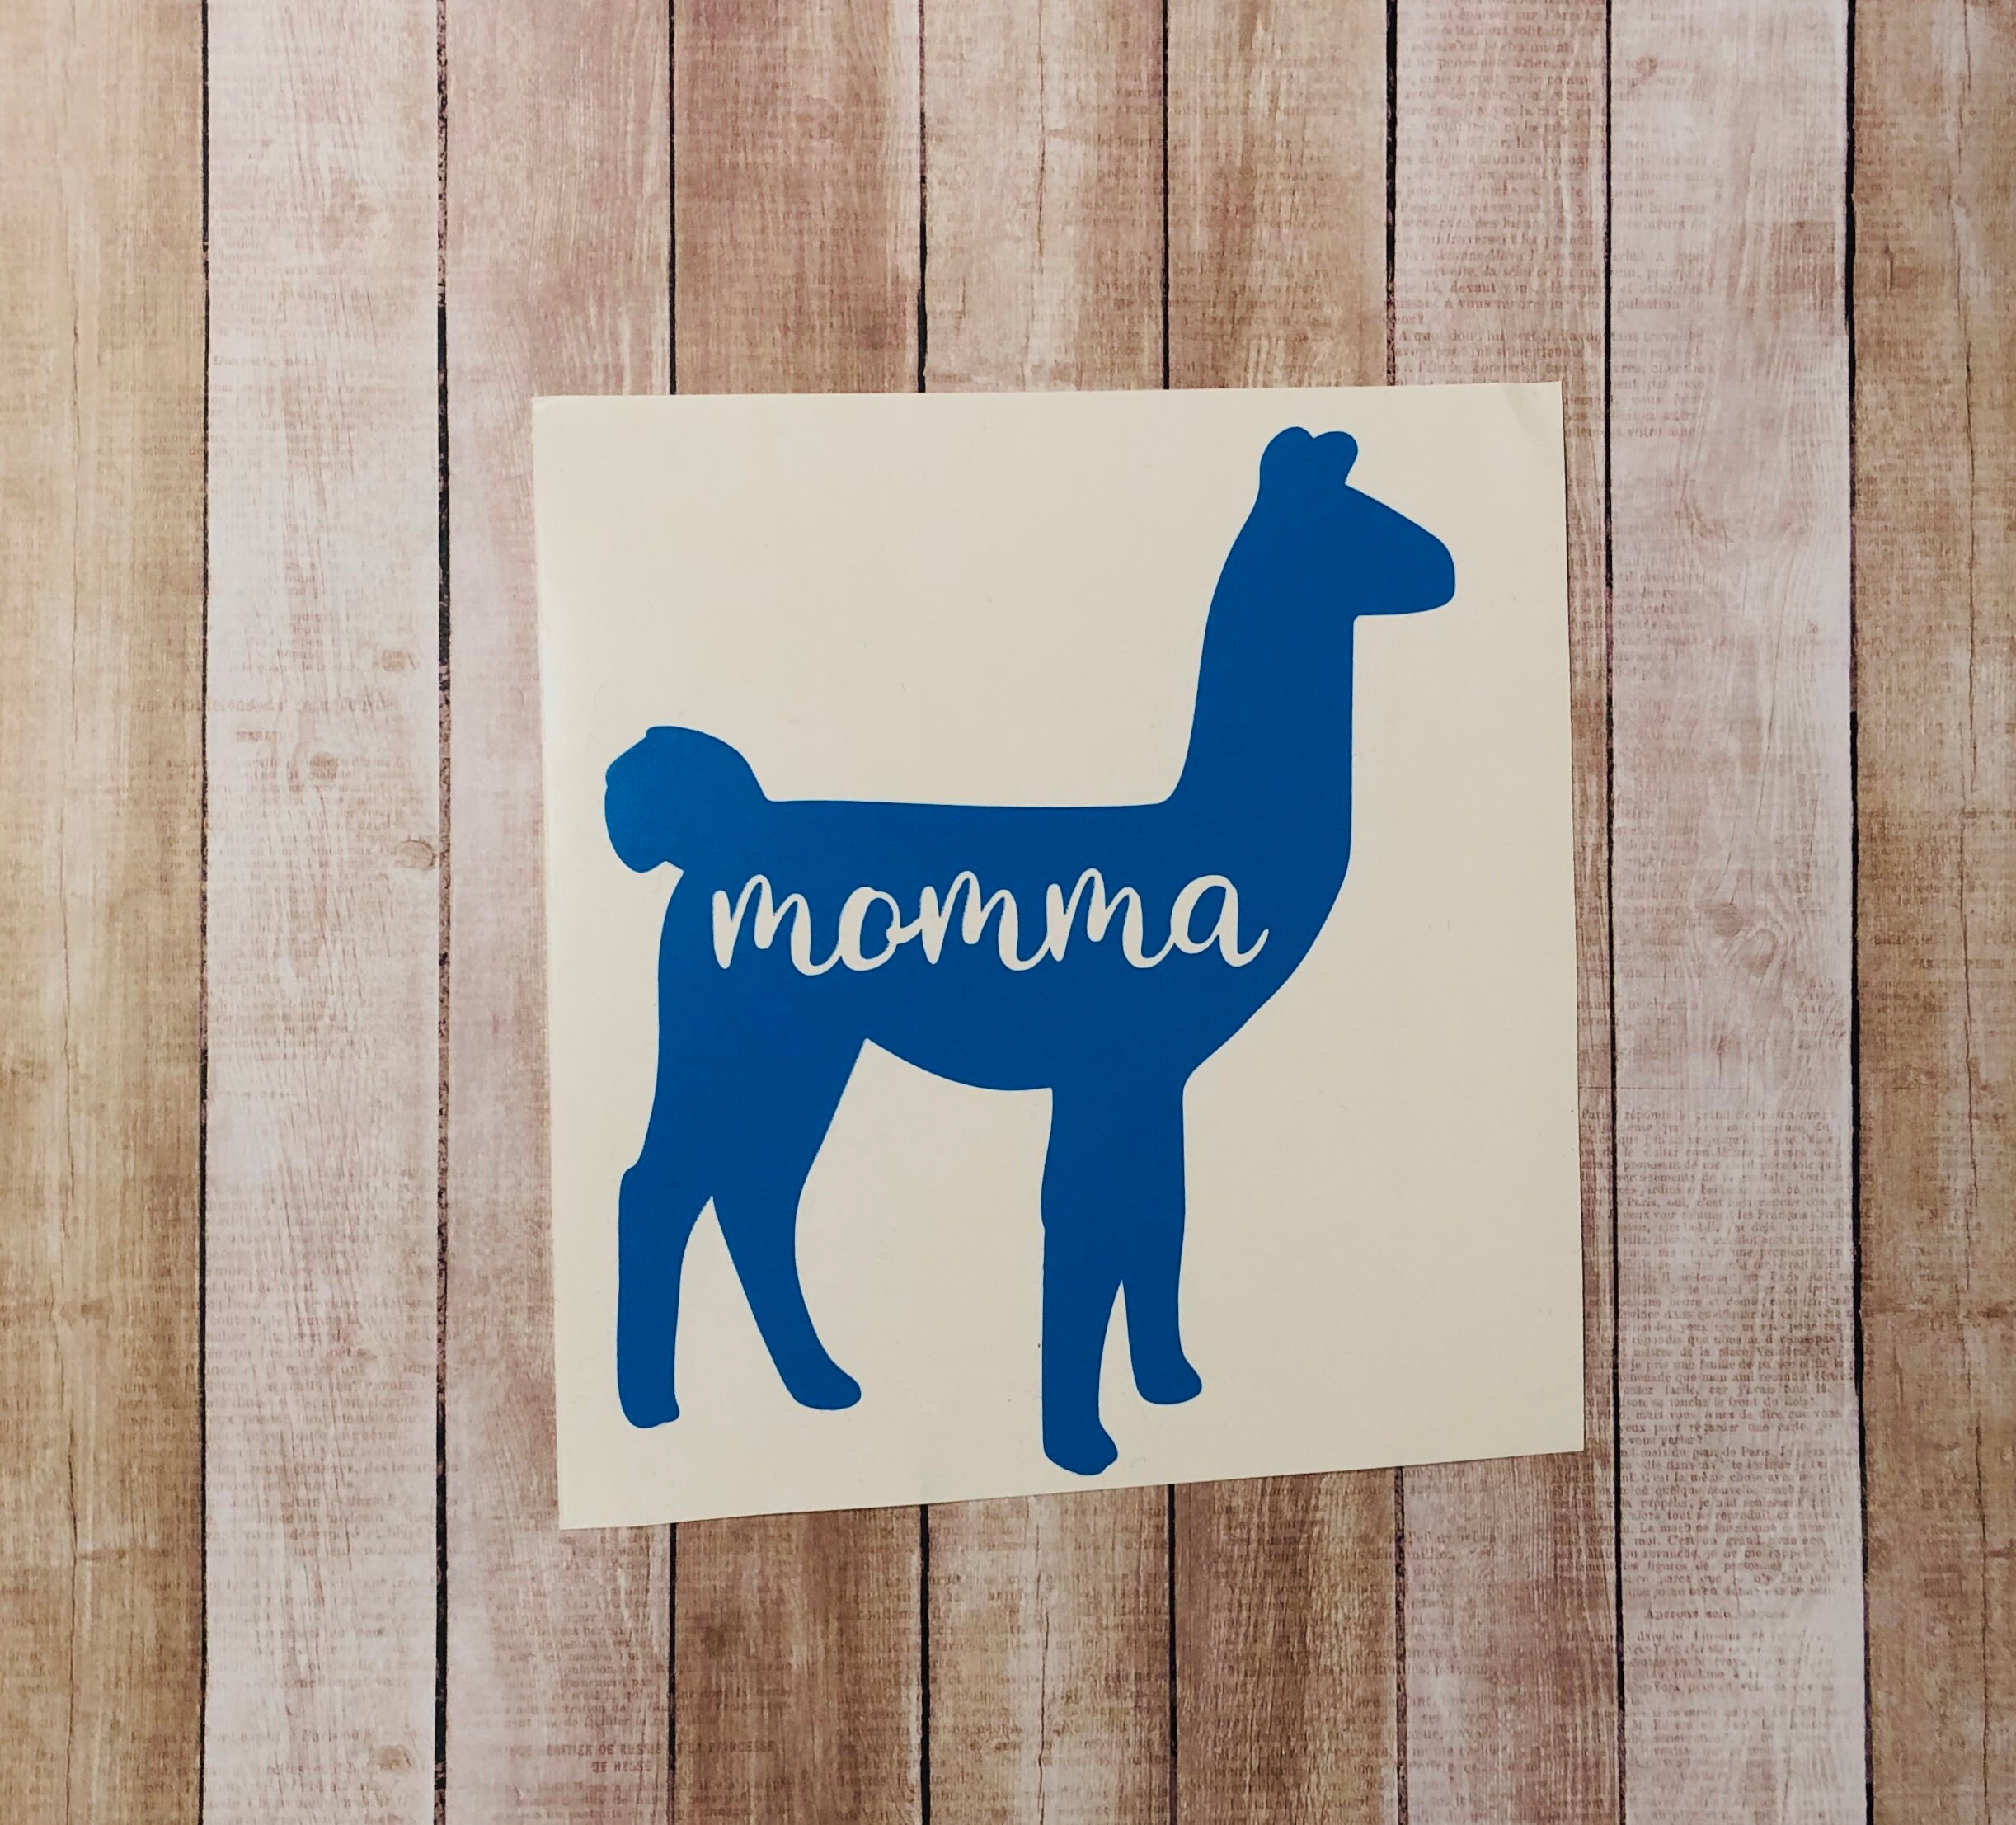 Vinyl Decal Size Chart for Cups – Pixel Llama